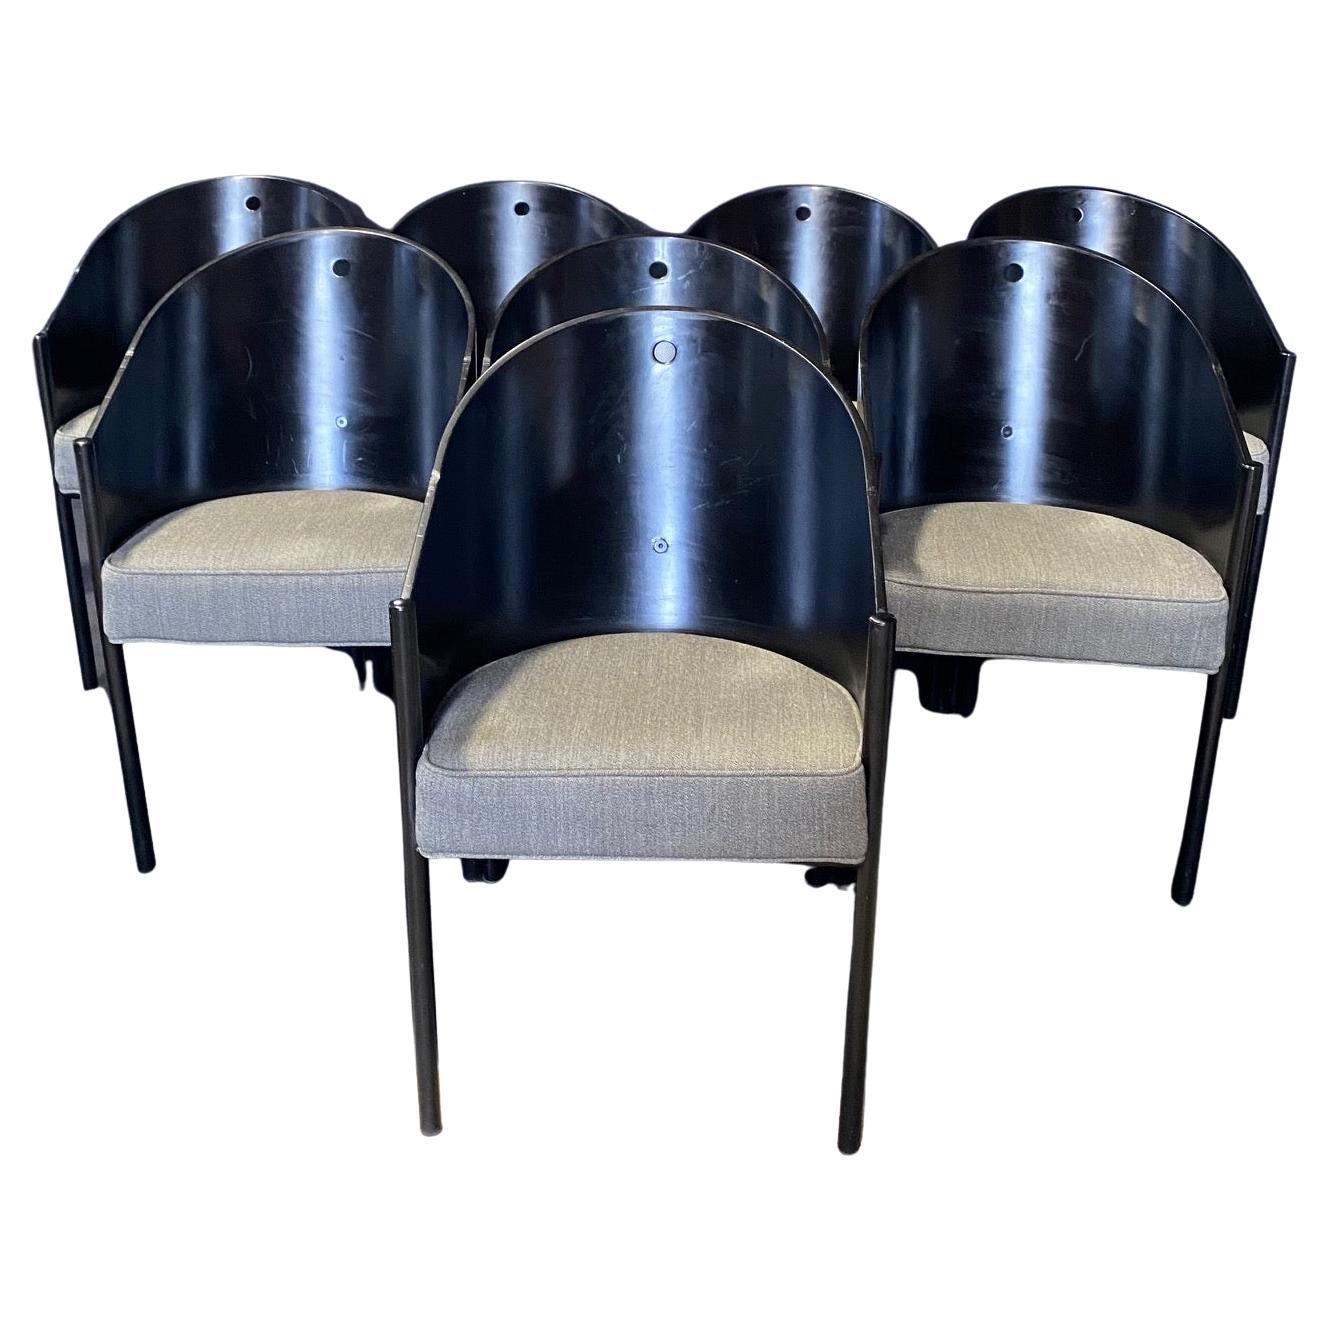 Iconic Set of 8 Black Laminated Plywood Philippe Starck Pratfall Dining Chairs For Sale